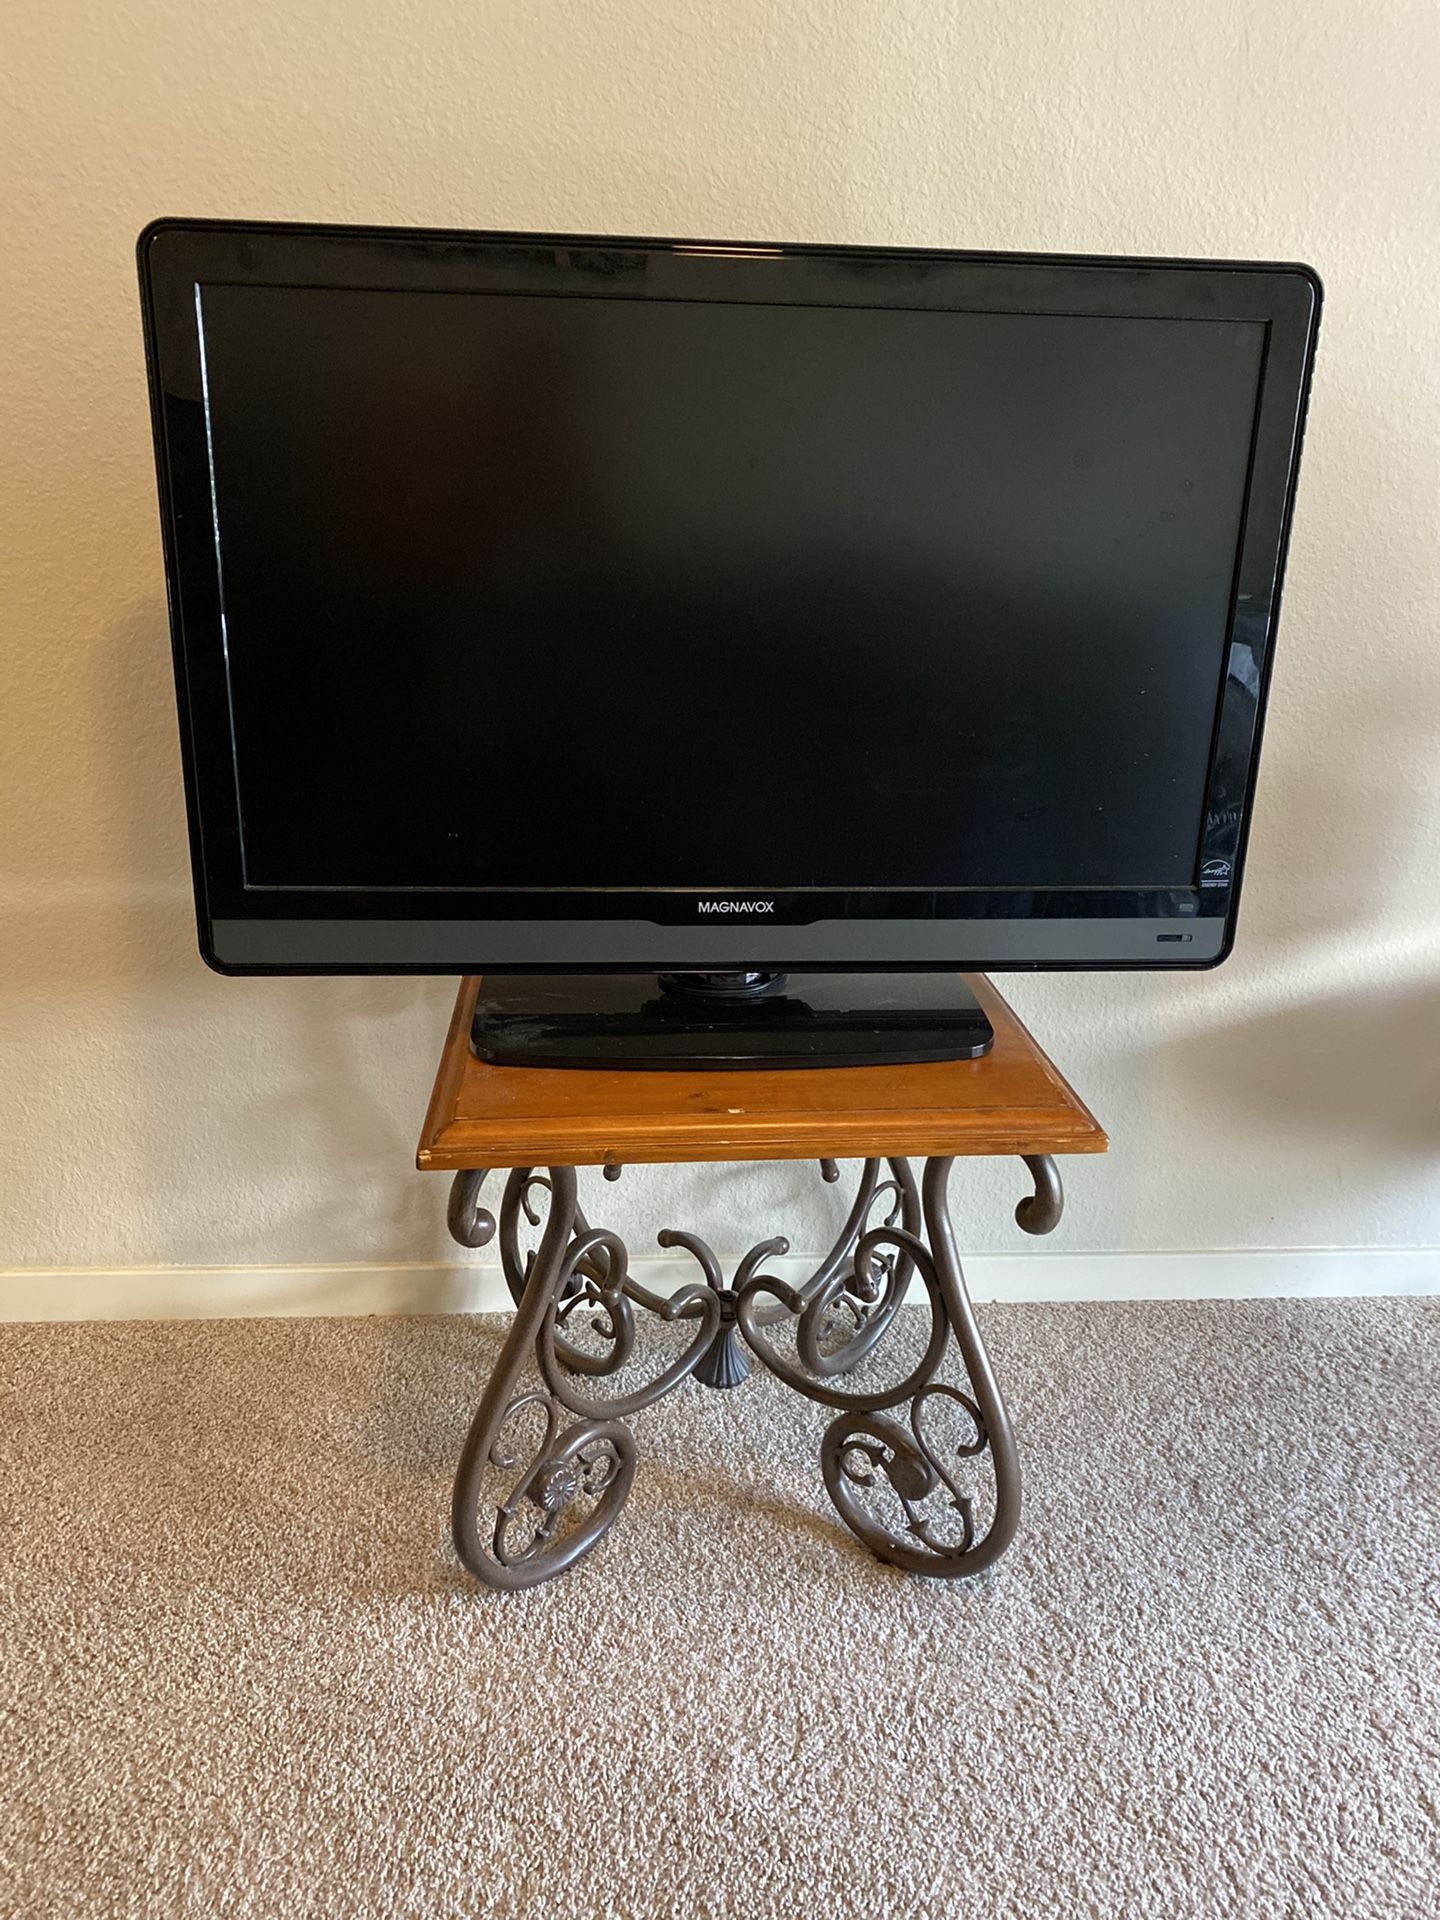 40 inch Magnavox TV with Stand - Great Condition